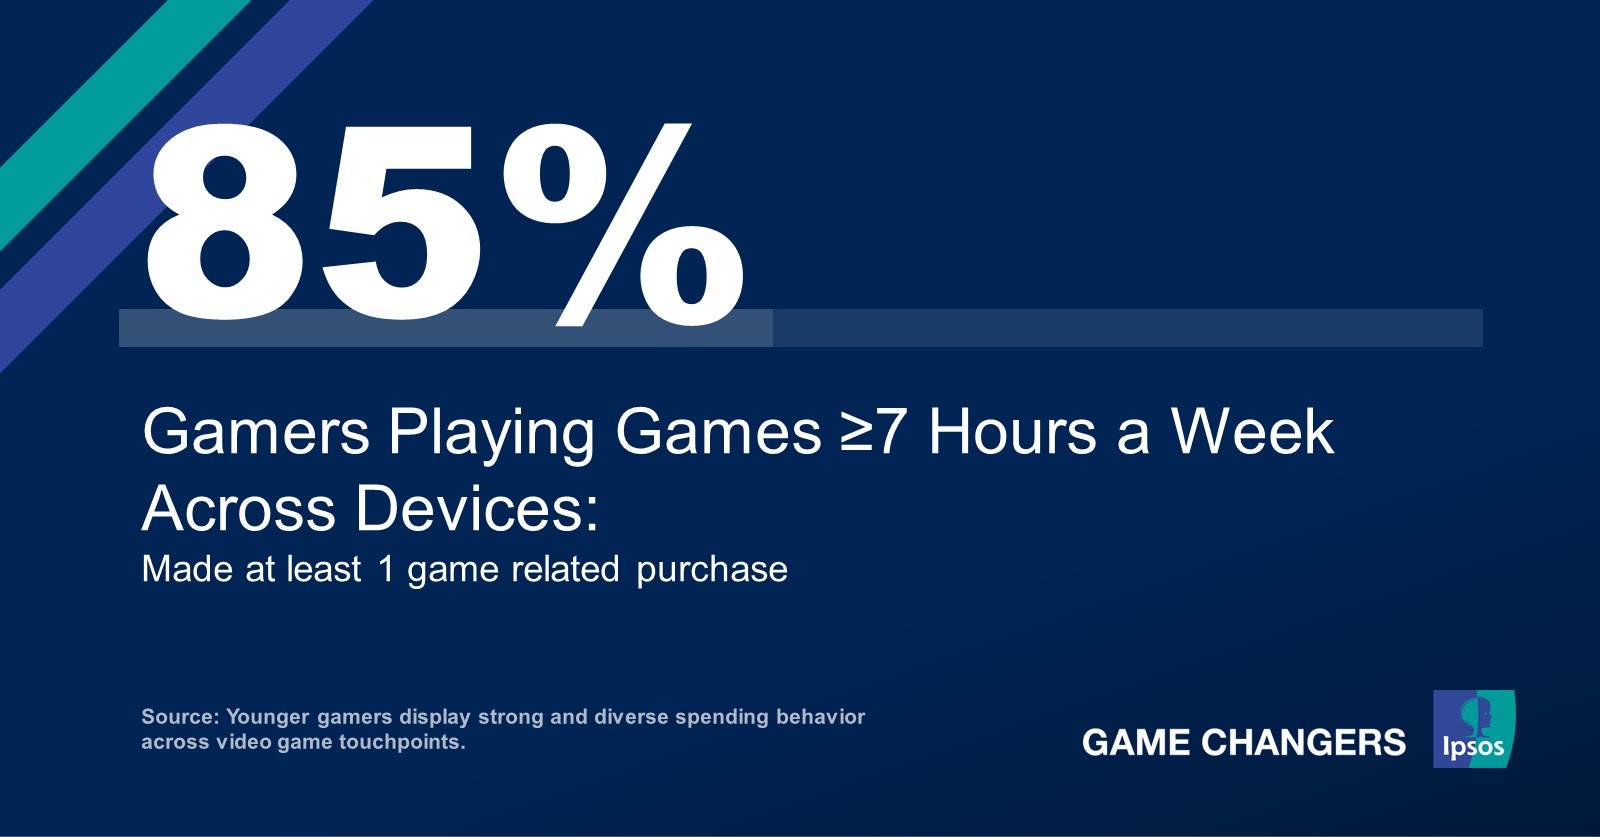 Younger gamers display strong and diverse spending behavior